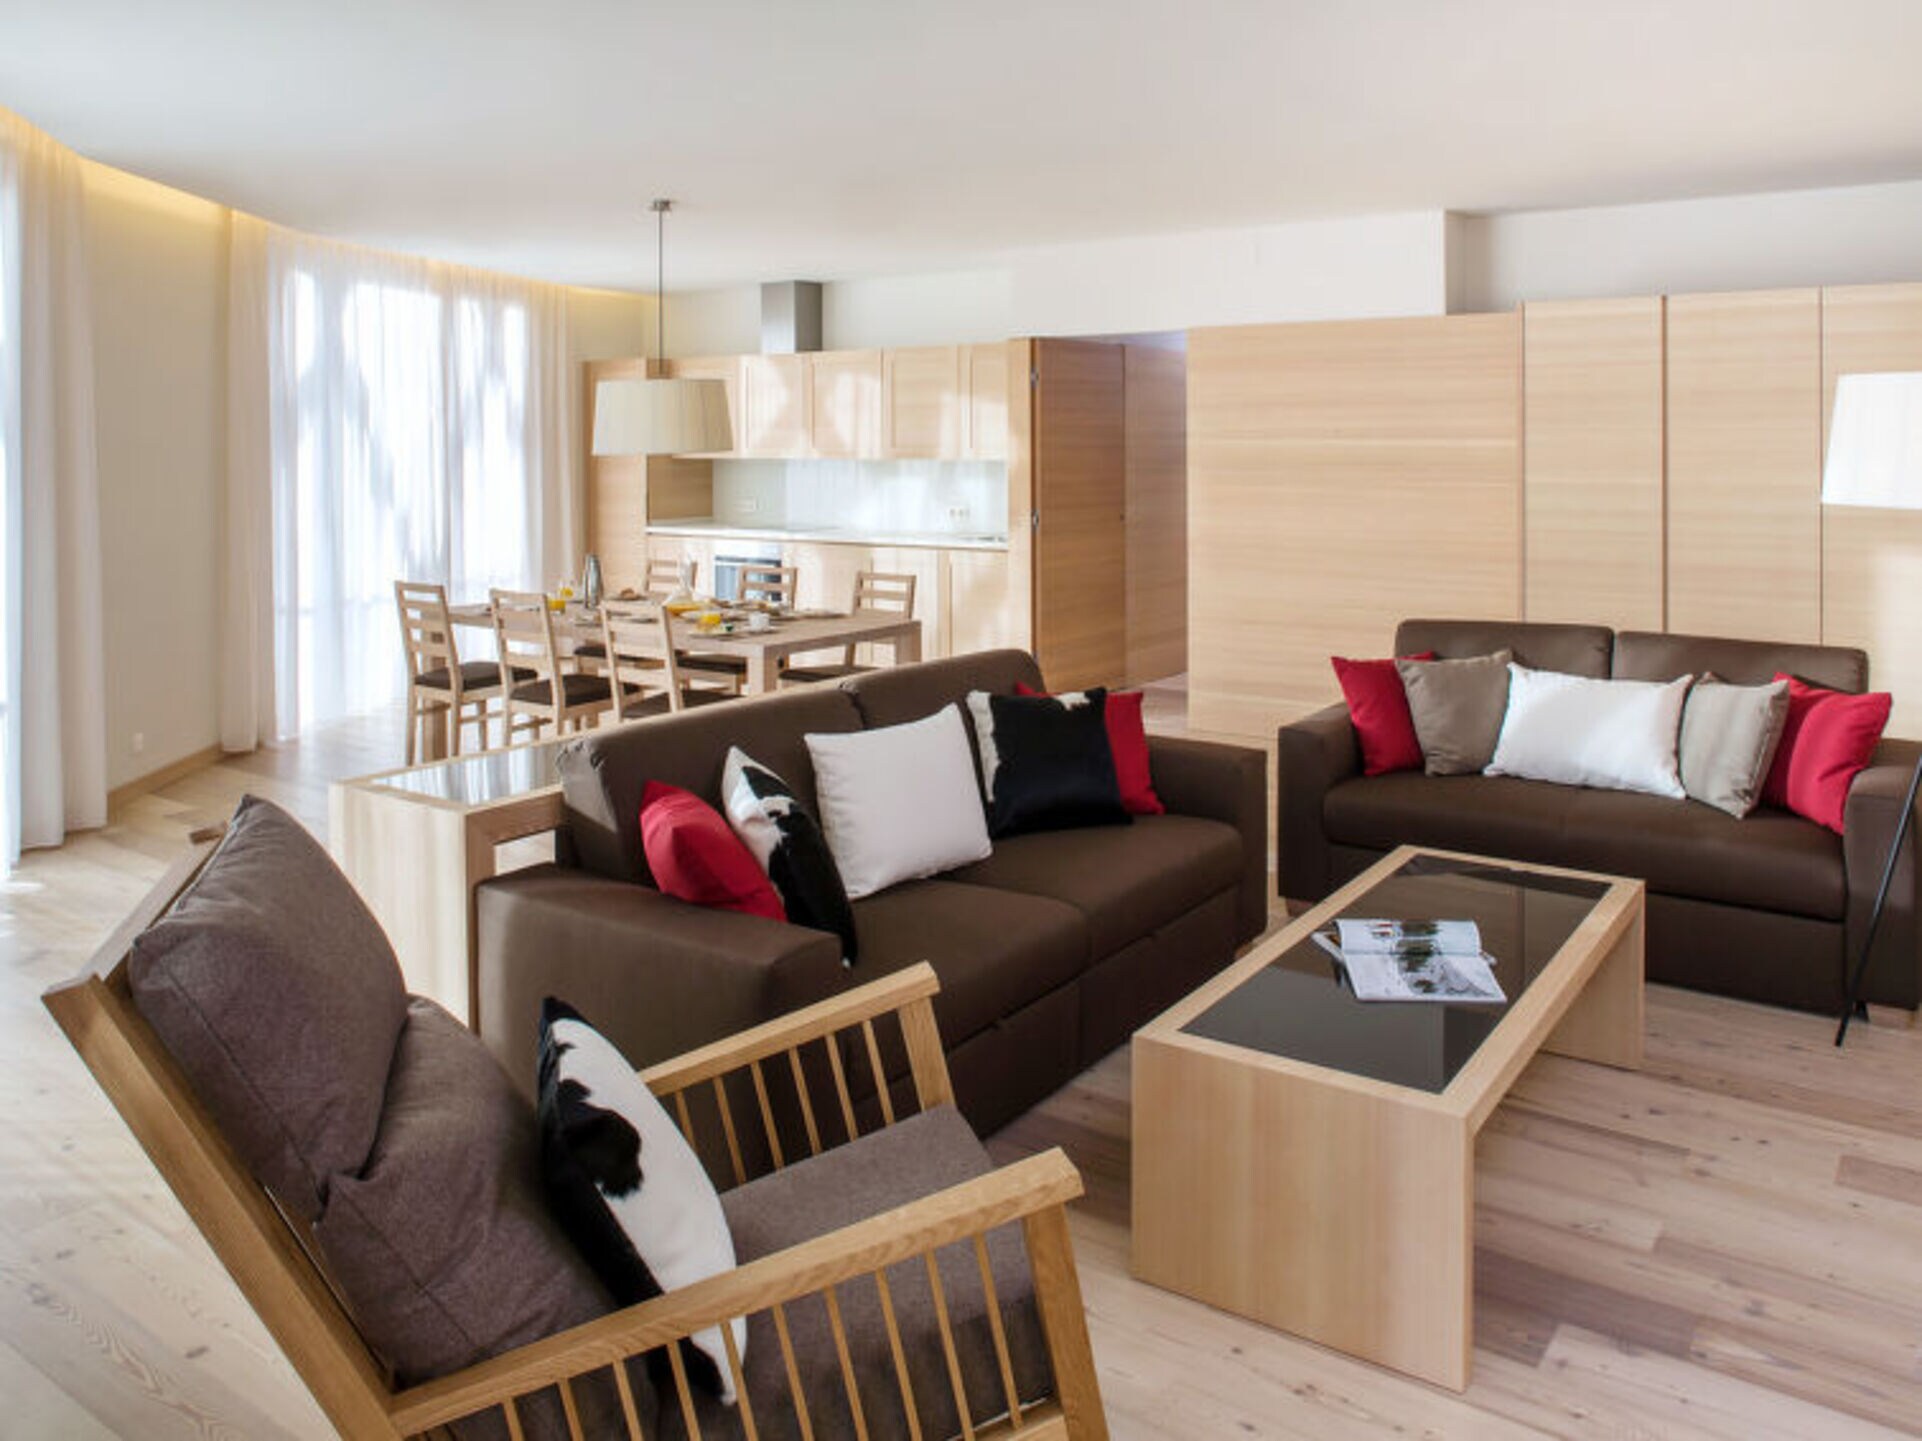 Property Image 2 - The Ultimate Apartment in the Perfect Location, Kärnten Apartment 1003